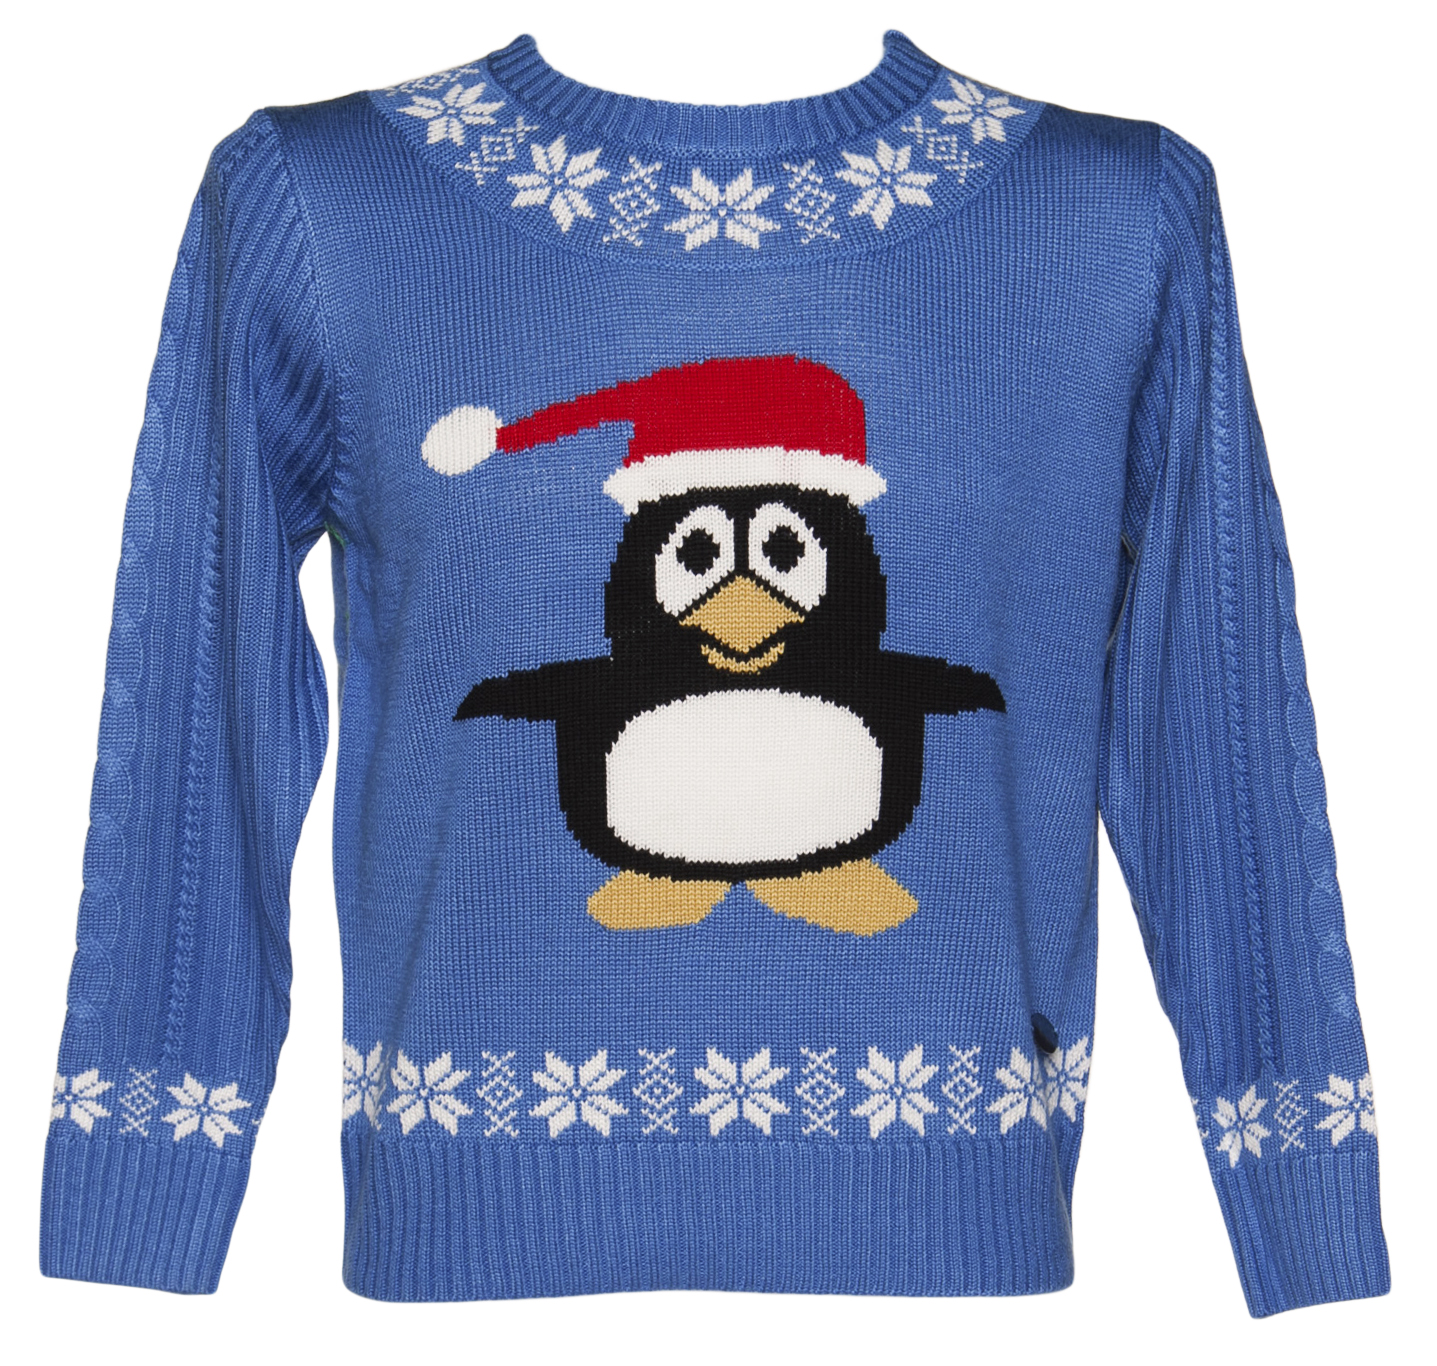 Unisex Percy Penguin Christmas Jumper from Crazy